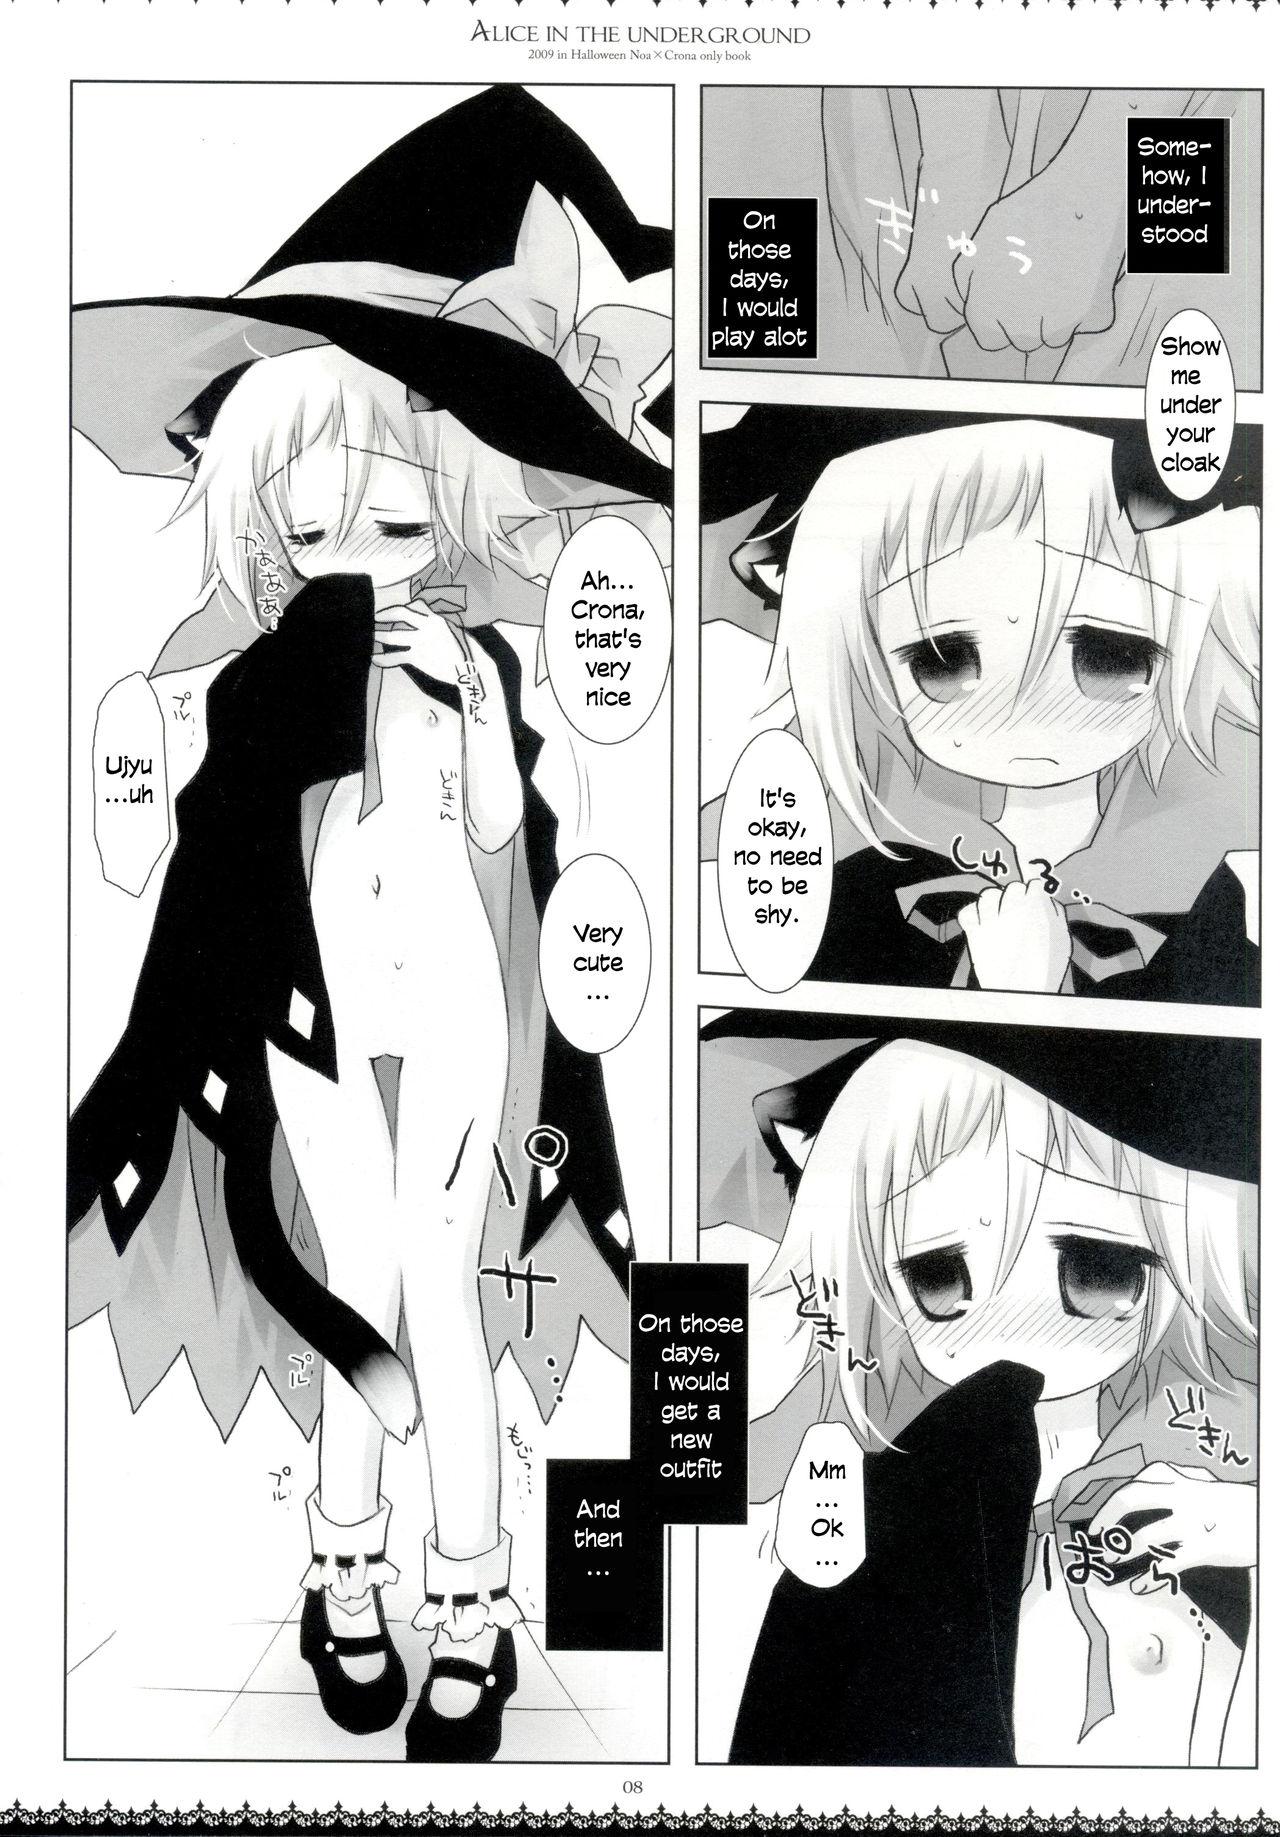 Boss Alice in the underground - Soul eater Bigdick - Page 7